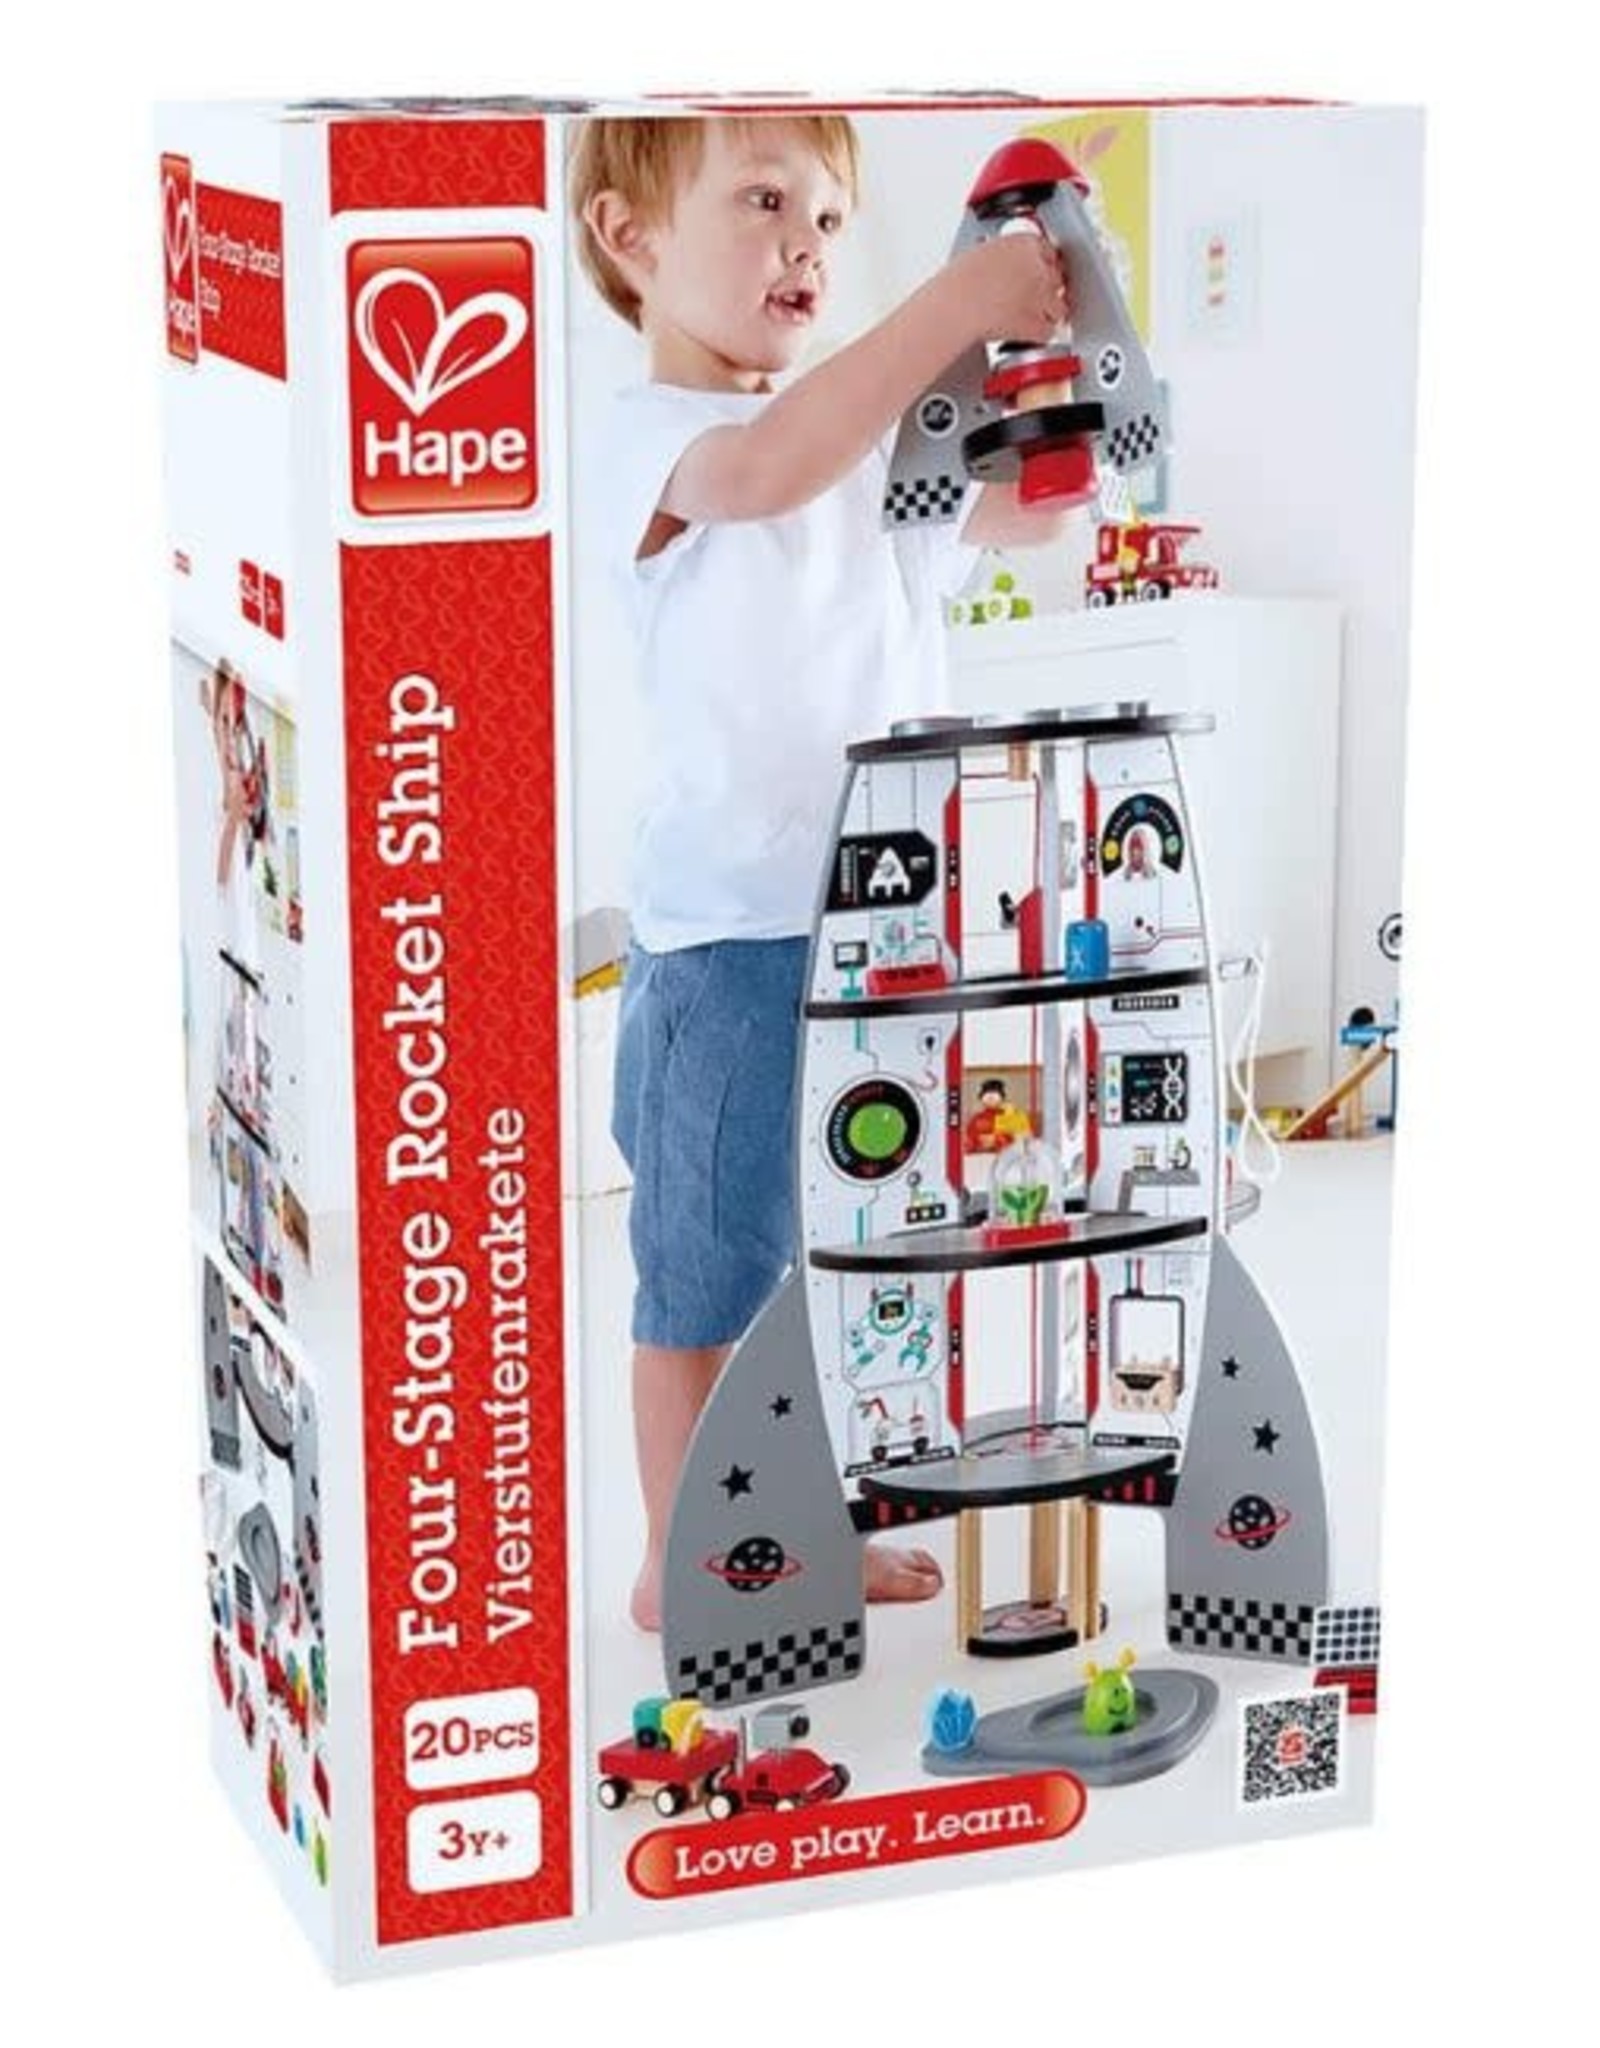 Hape Toys Four Stage Toddler Rocket Ship Playset by Hape